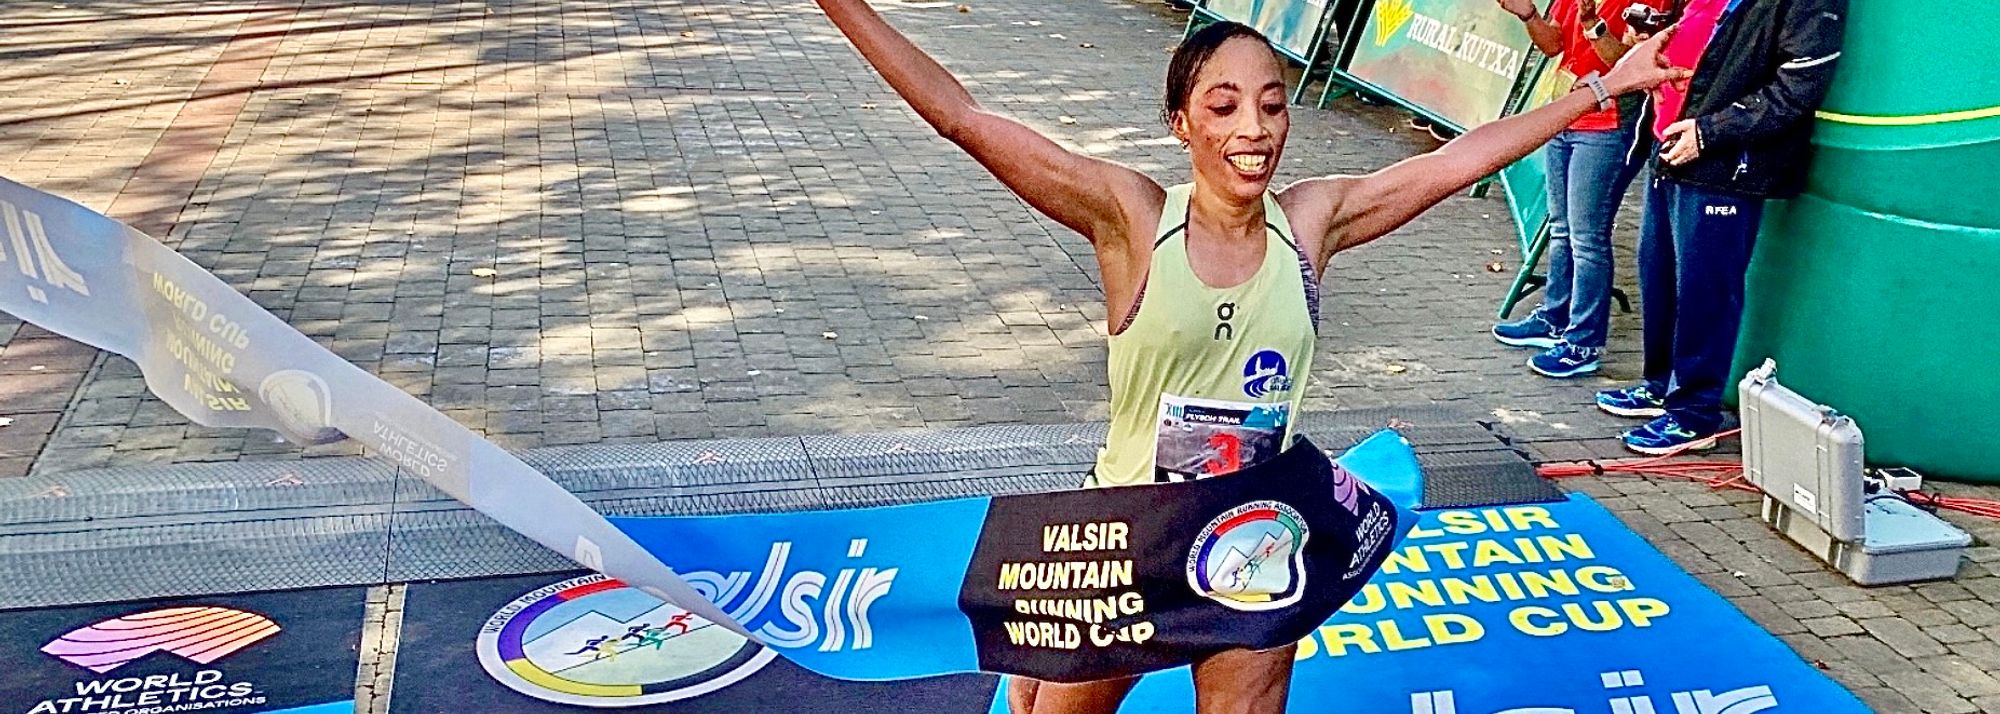 Lucy Wambui Murigi and Loic Robert won the penultimate race in this year's Valsir Mountain Running World Cup